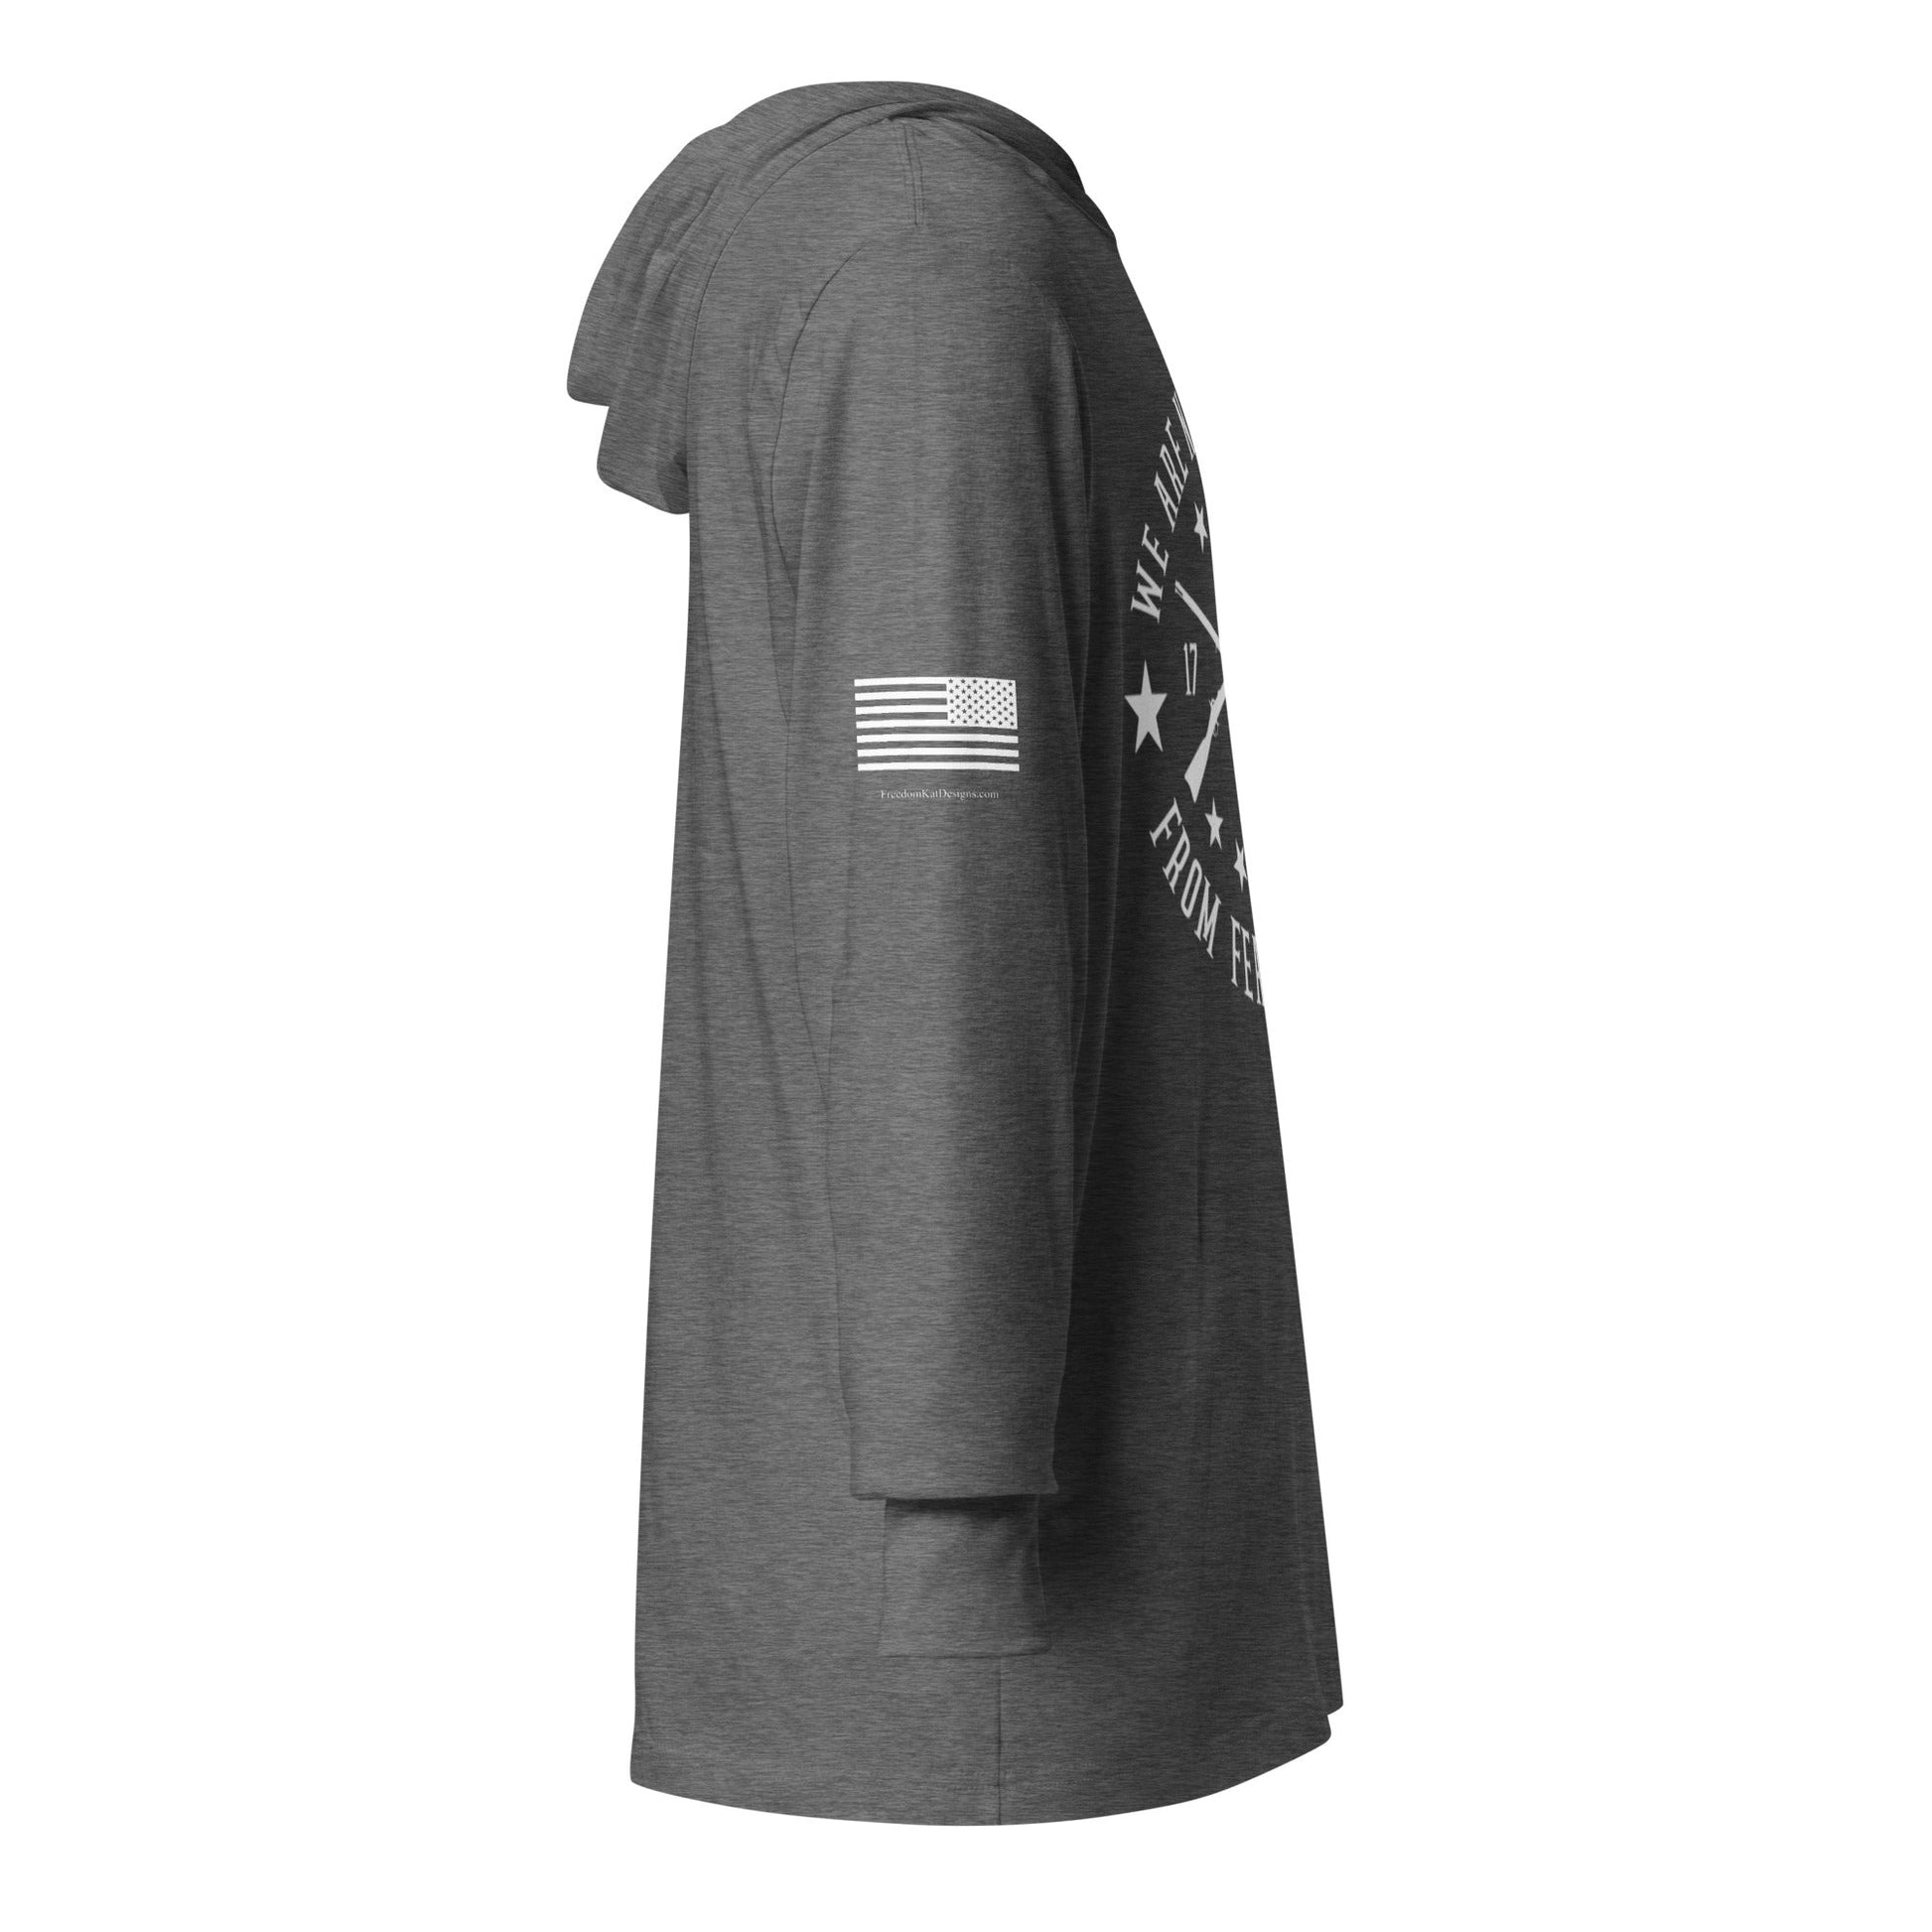 FreedomKat Designs, LLC We Are Not Descended Hooded long-sleeve tee